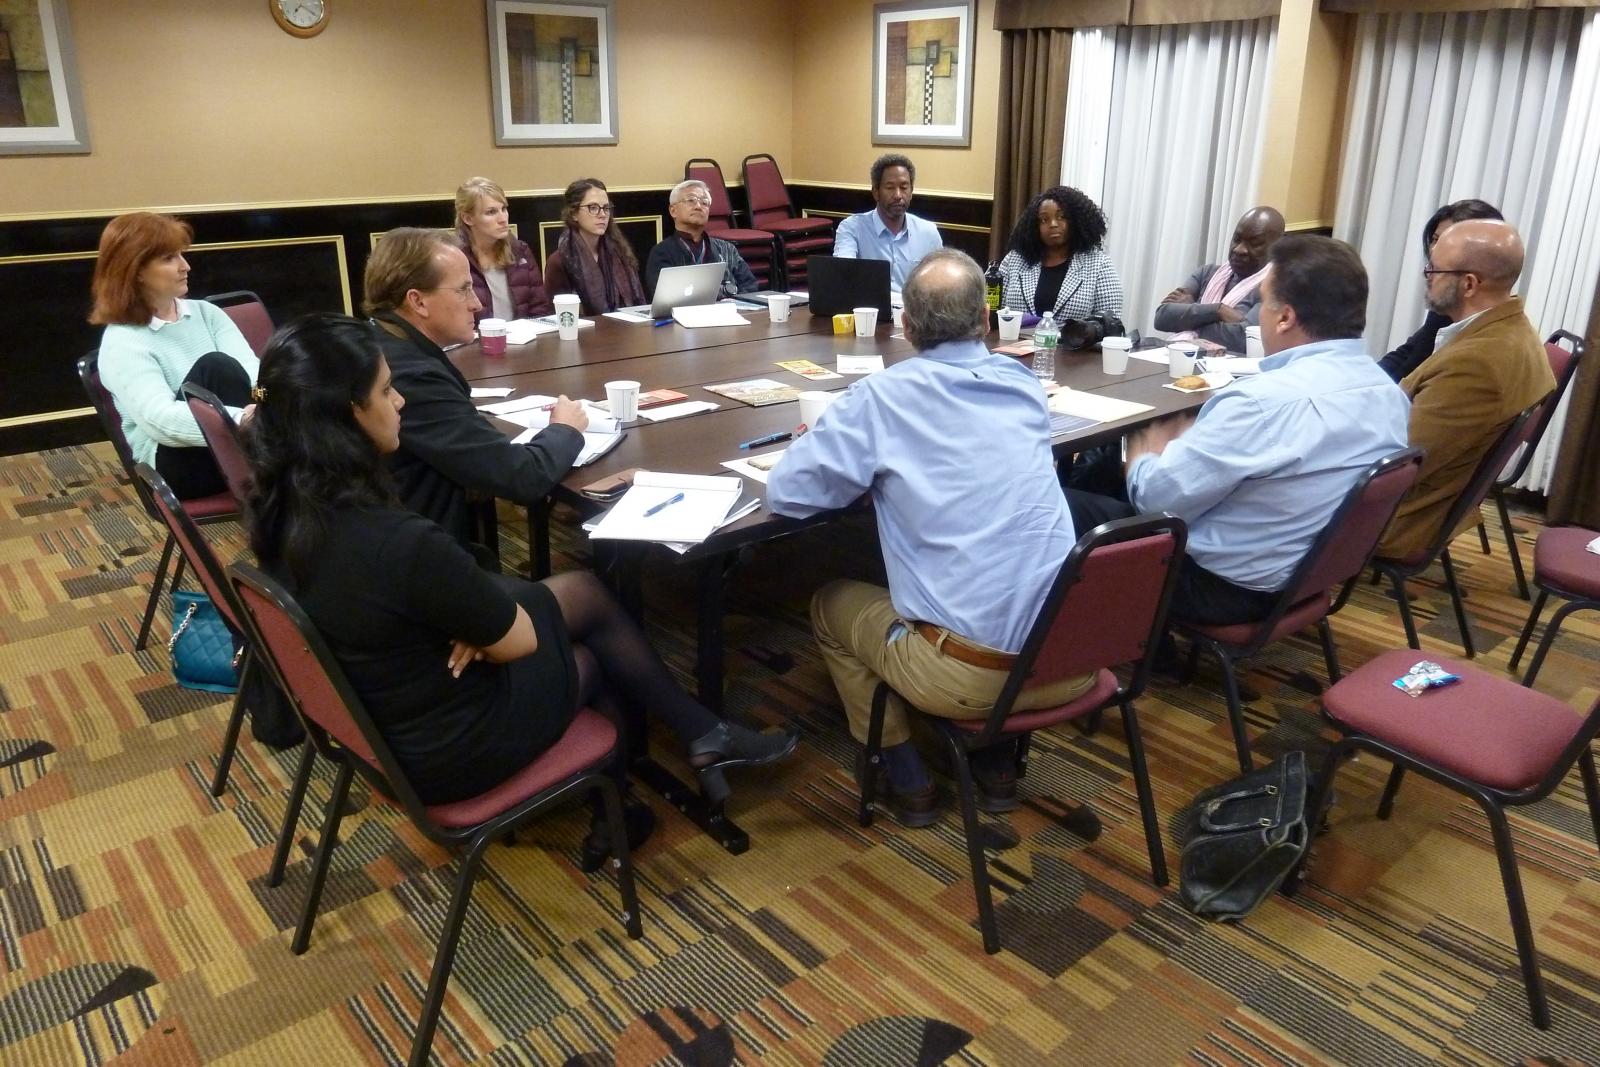 Students meet with stakeholders from the Friends of the John Coltrane Home, a non-profit whose mission is to fulfill John and Alice Coltranes’ vision of goodwill and connection through the sharing of the common language of music.